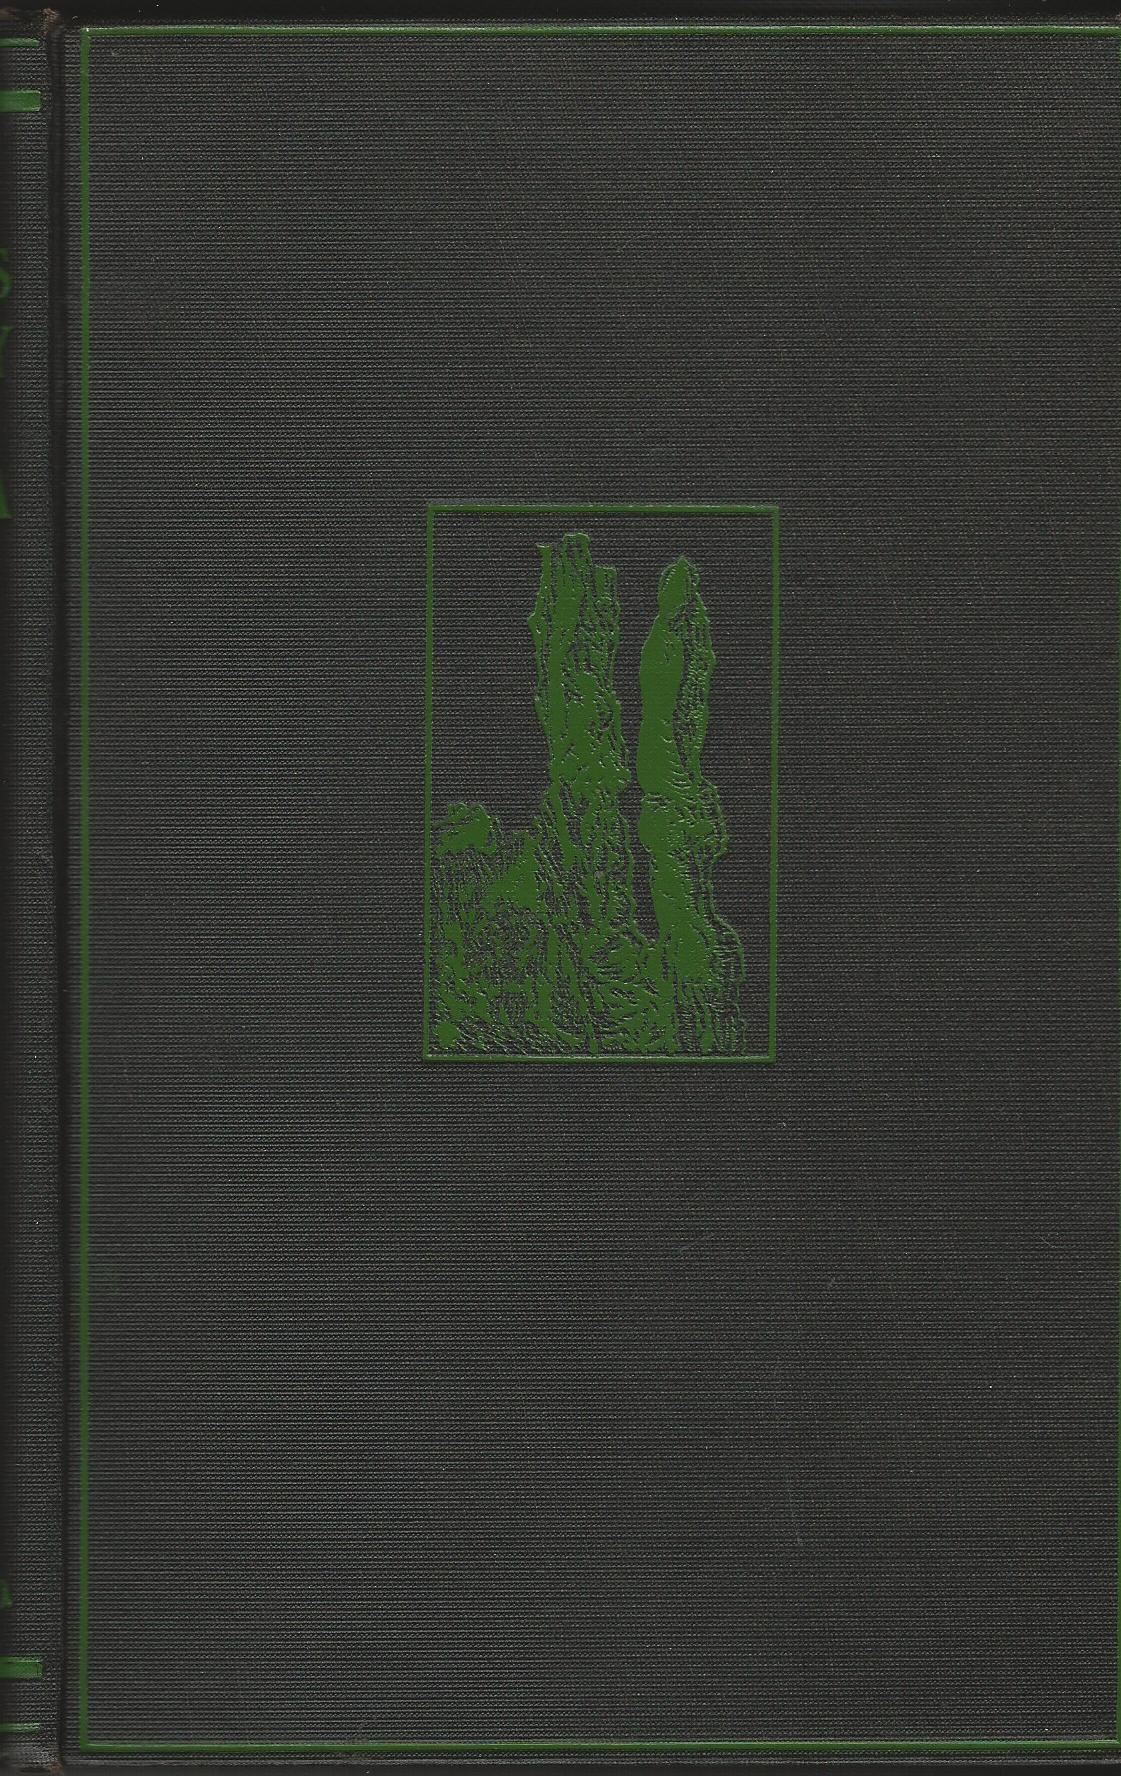 Image for The Rift Valleys and Geology of East Africa: An Account of the Origin & History of the Rift Valleys of East Africa & Their Relation to the Contemporary Earth-Movements which Transformed the Geography of the World. With Some Account of the Prehistoric Stone Implements, Soils, Water Supply, & Mineral Resources of the Kenya Colony. With Appendices on the Edible Earths, Soils, Fossils, Rocks, and Masai Place-Names.